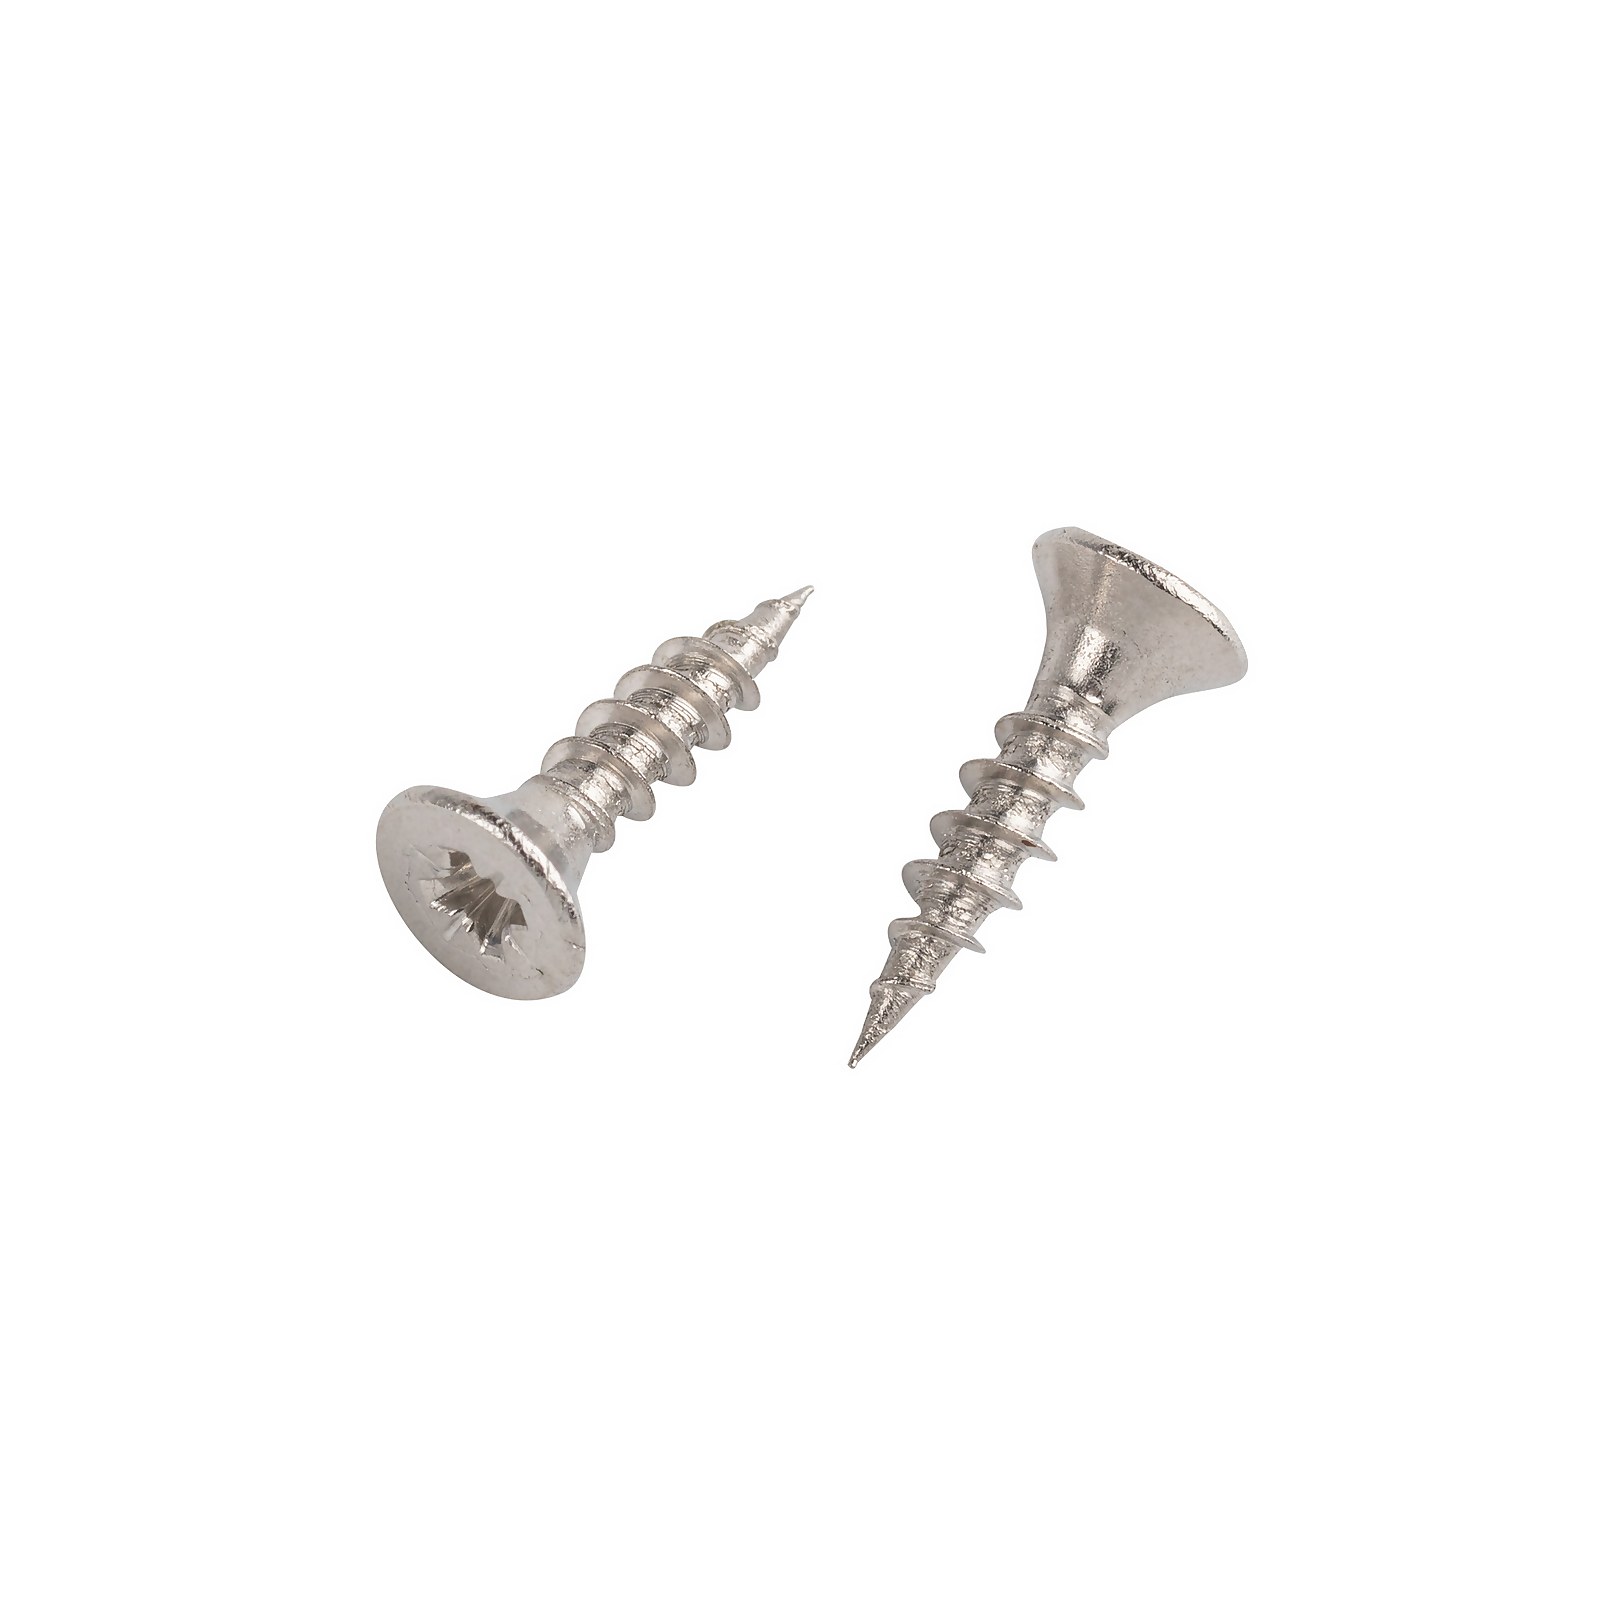 Photo of Homebase Stainless Steel Single Thread Screw 3.5 X 12mm 100 Pack